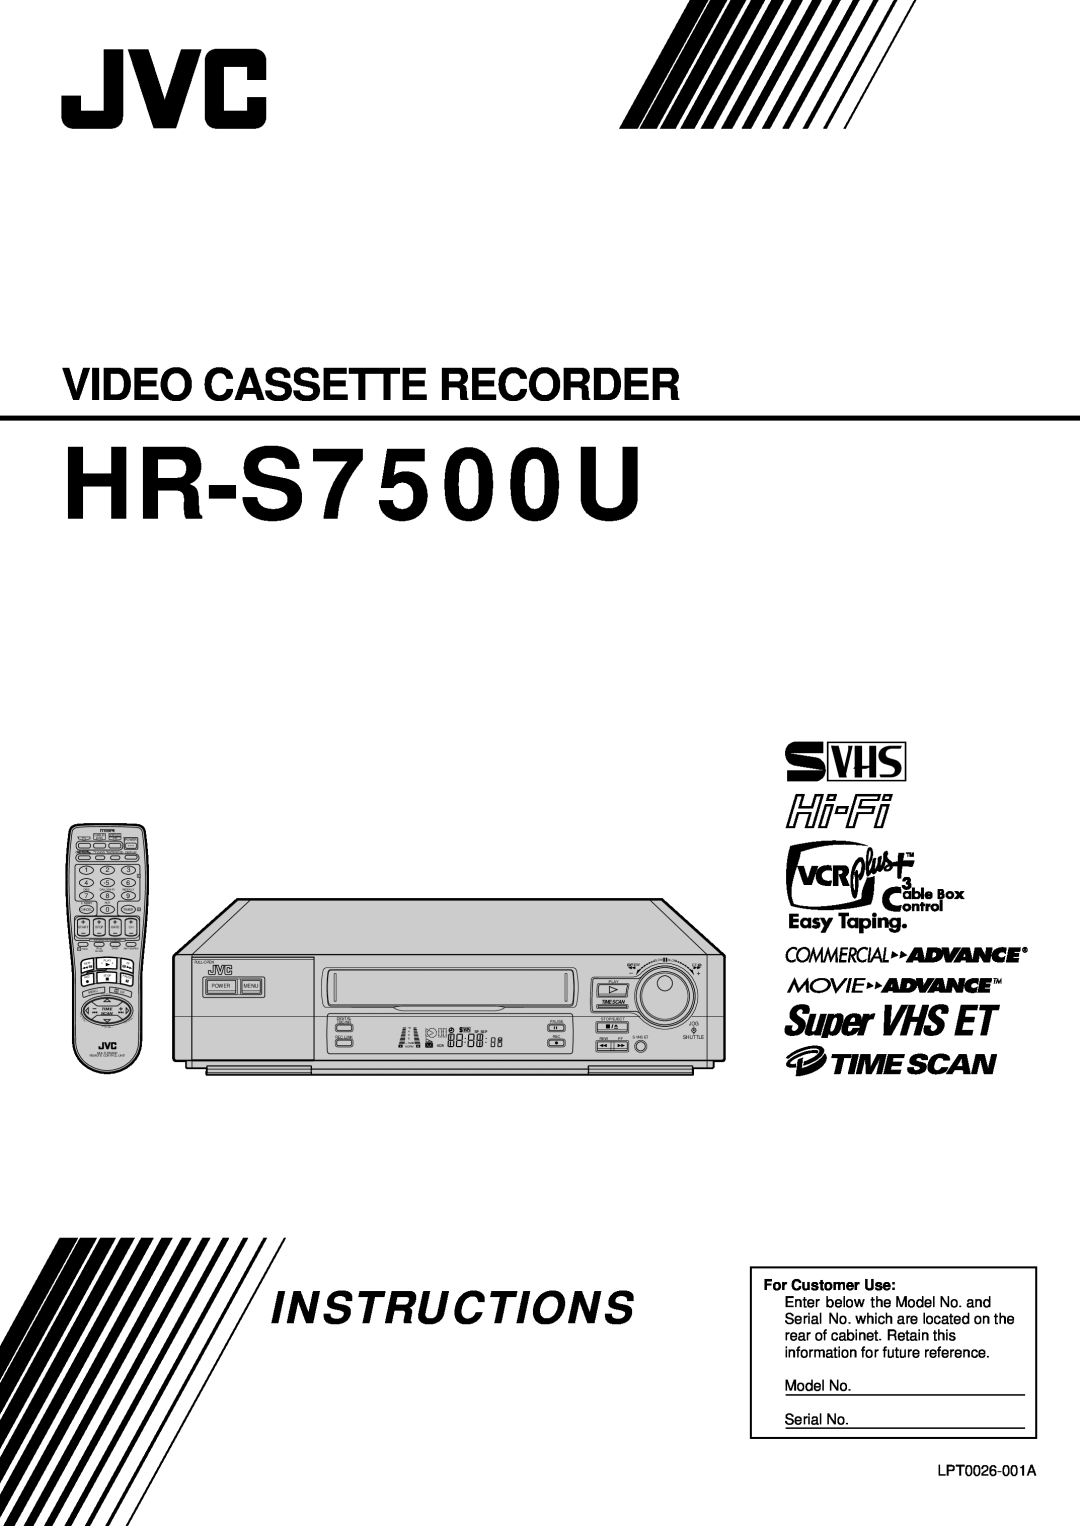 JVC HR-S7500U manual Video Cassette Recorder, Instructions, For Customer Use, Model No Serial No, LPT0026-001A, Time, Scan 